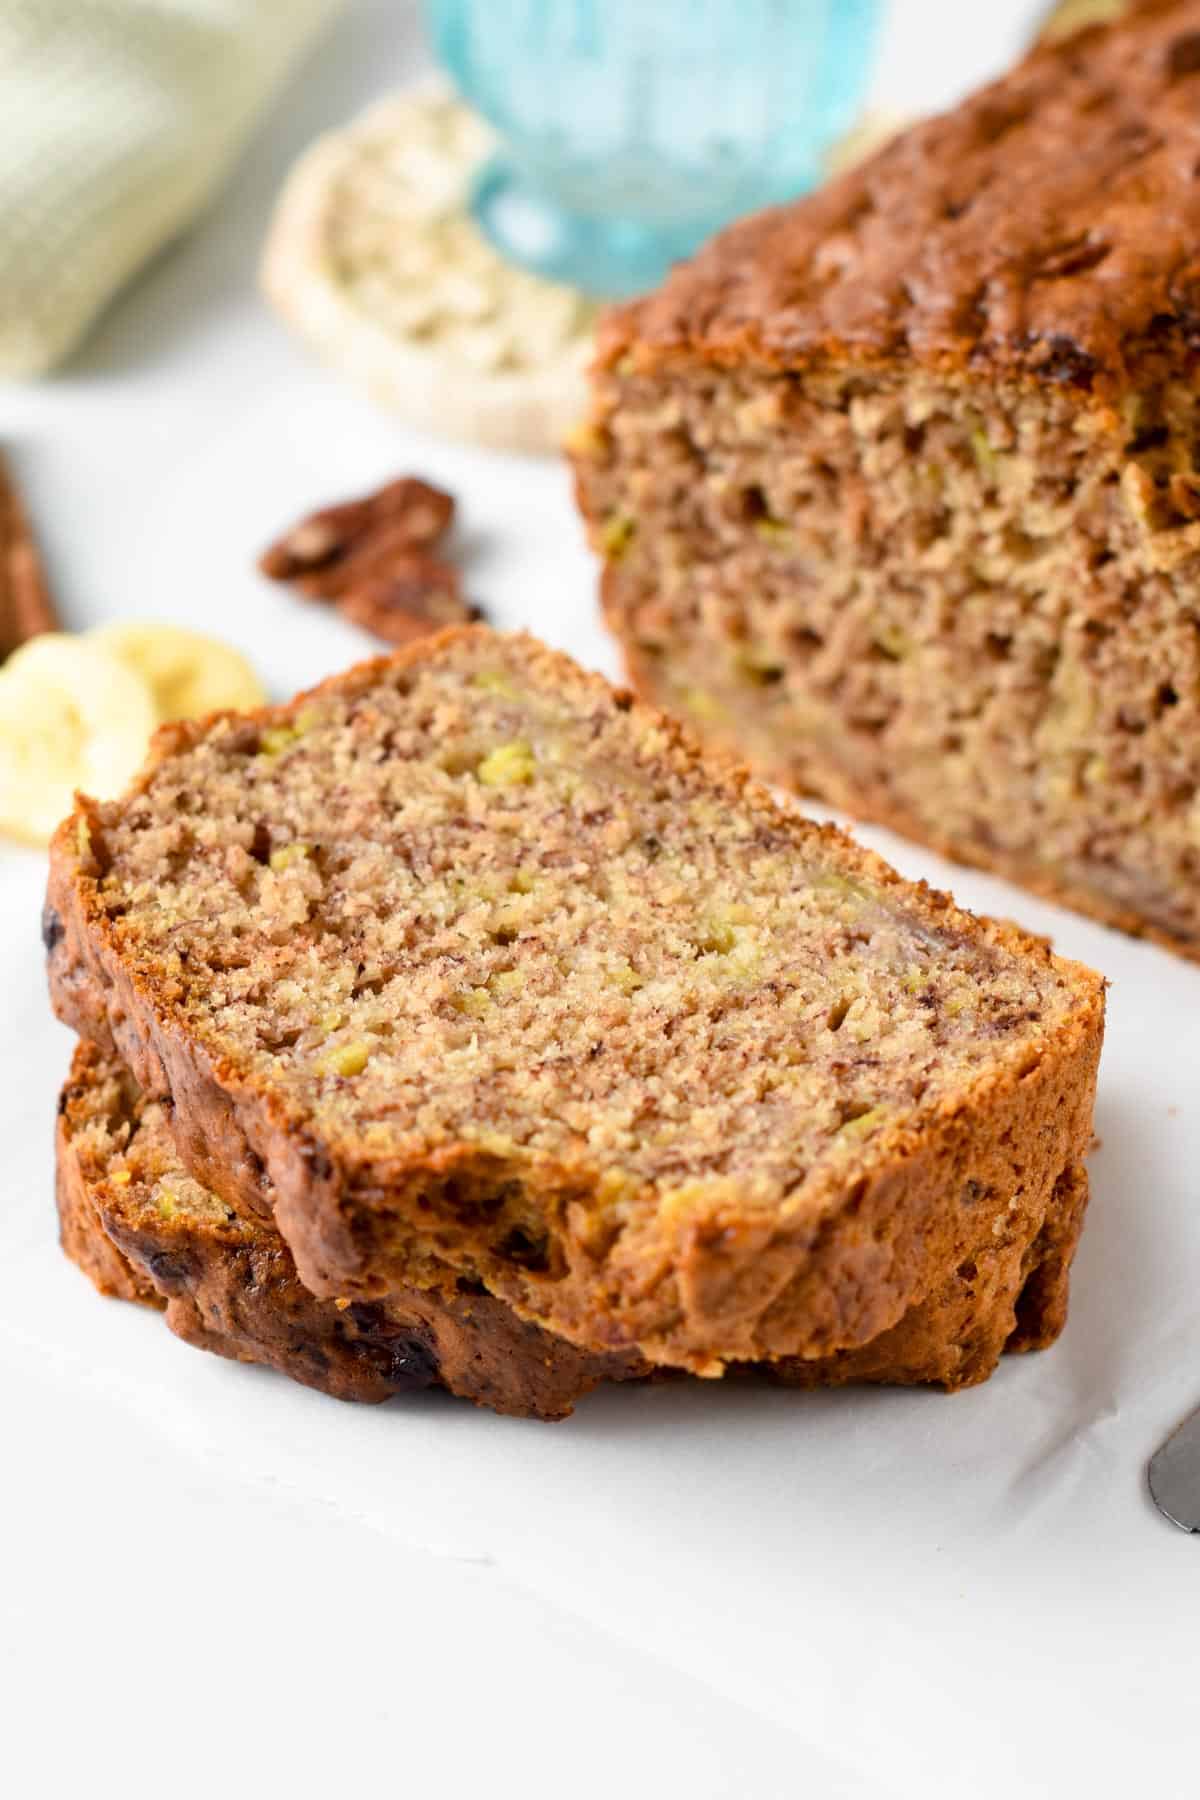 Two slices of Eggless Banana Bread flat on a plate in front of the whole loaf.